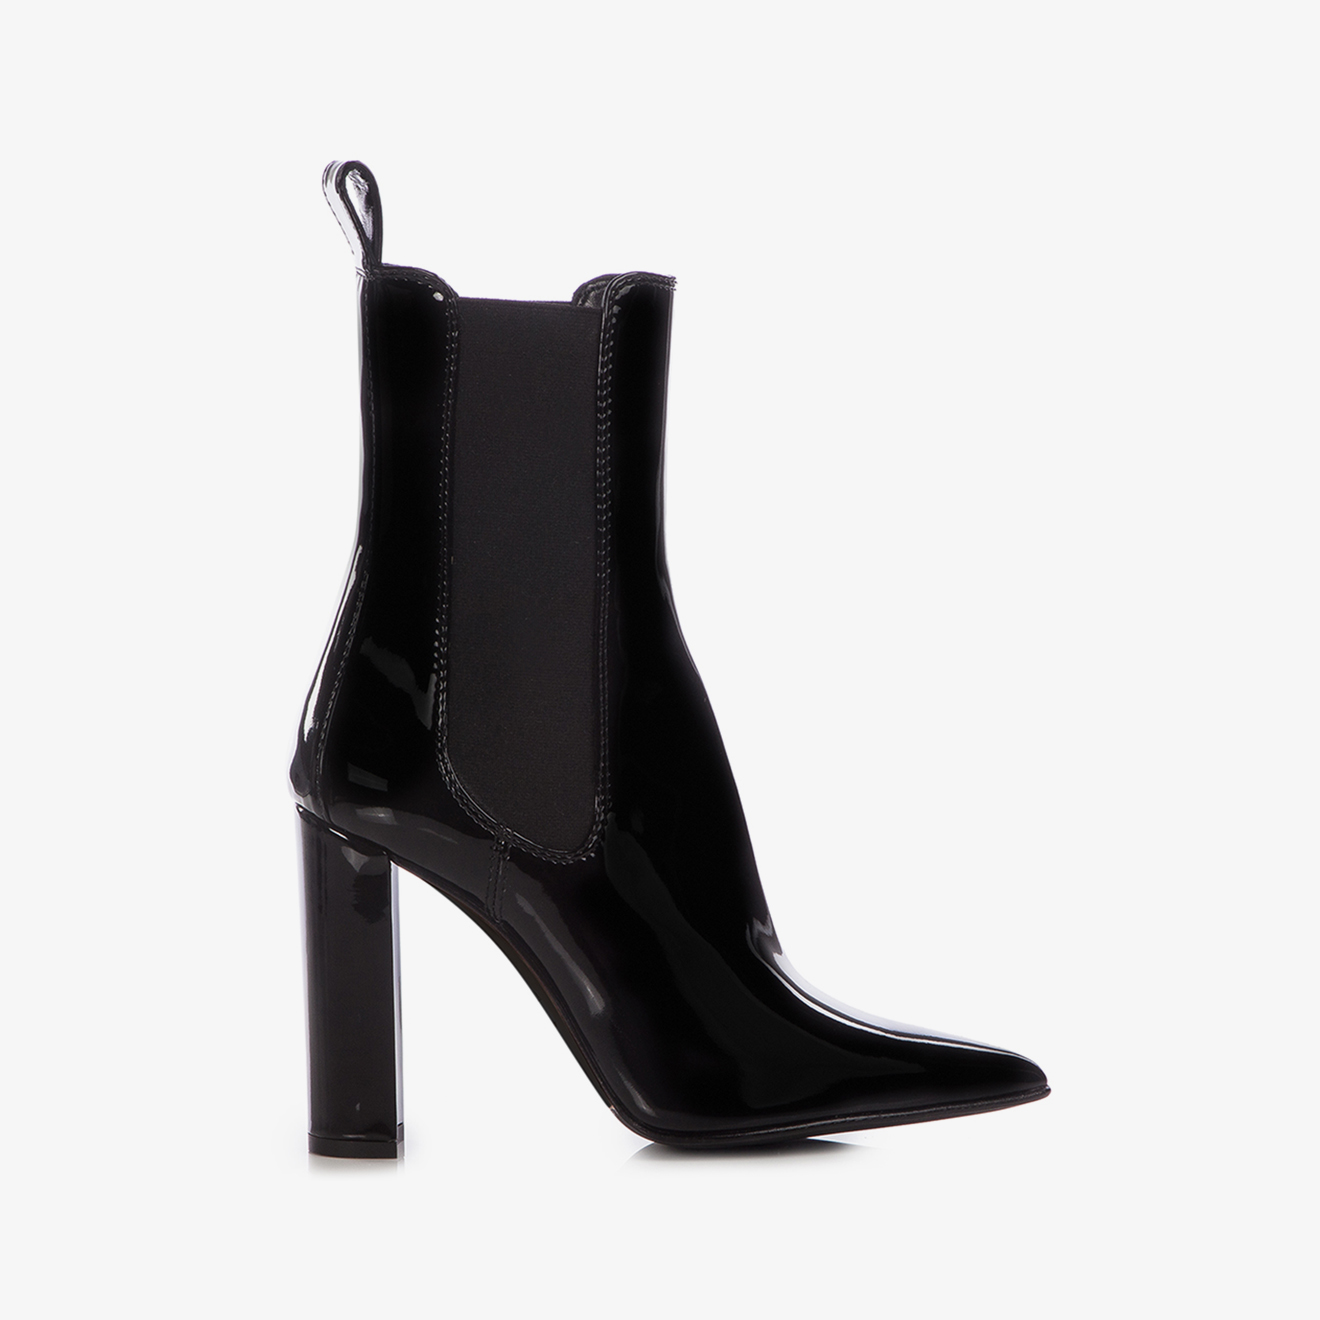 Black vinyl ankle boot with block heel - Le Silla